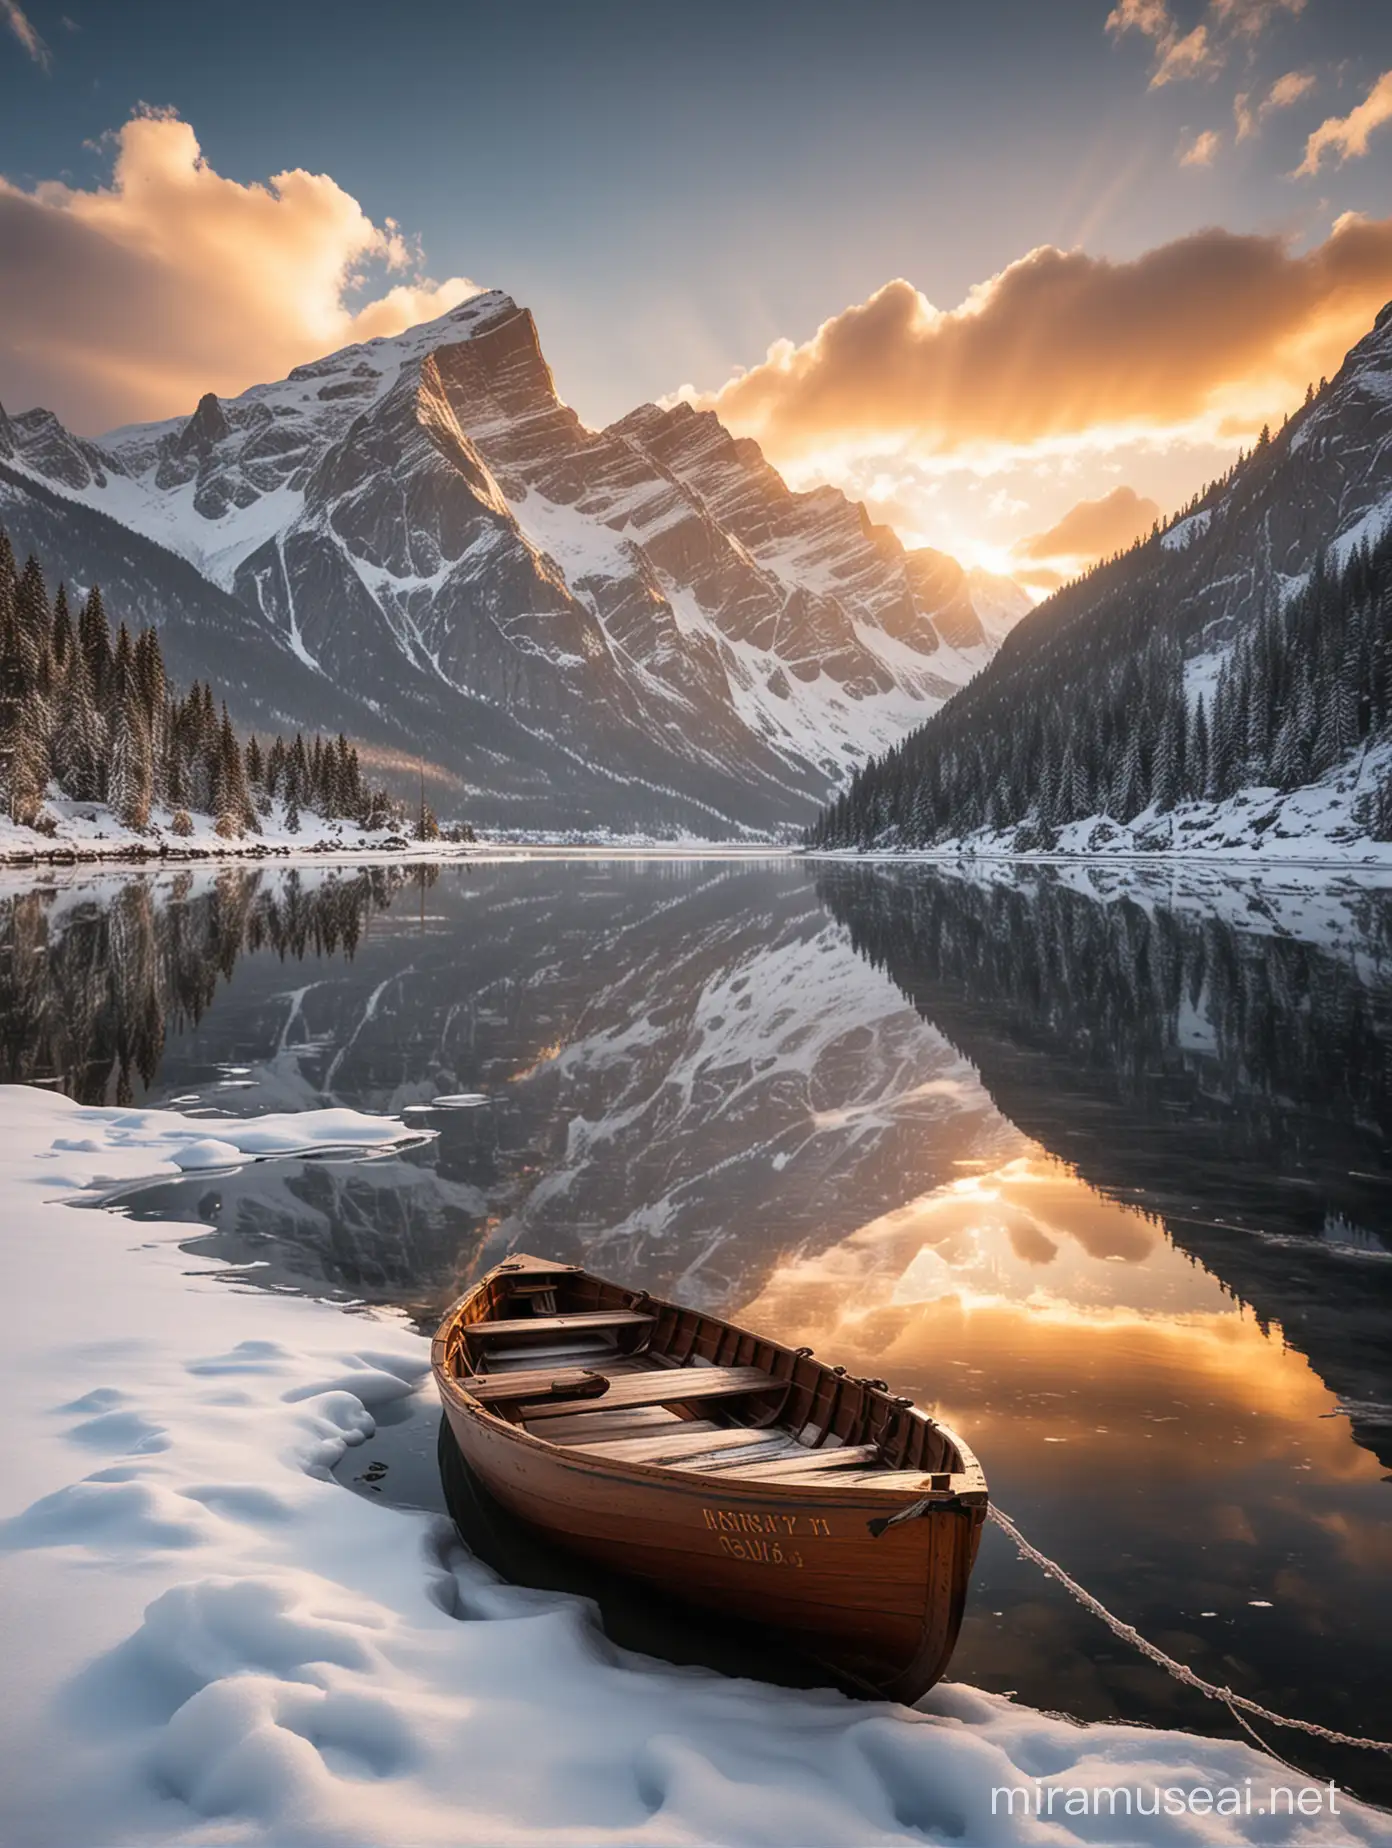 Visualize a serene winter scene: A wooden boat peacefully adrift on a frozen lake. Majestic snow-capped mountains stand tall in the background, with the setting sun casting a golden hue on the clouds above and reflecting its brilliance in the calm waters below